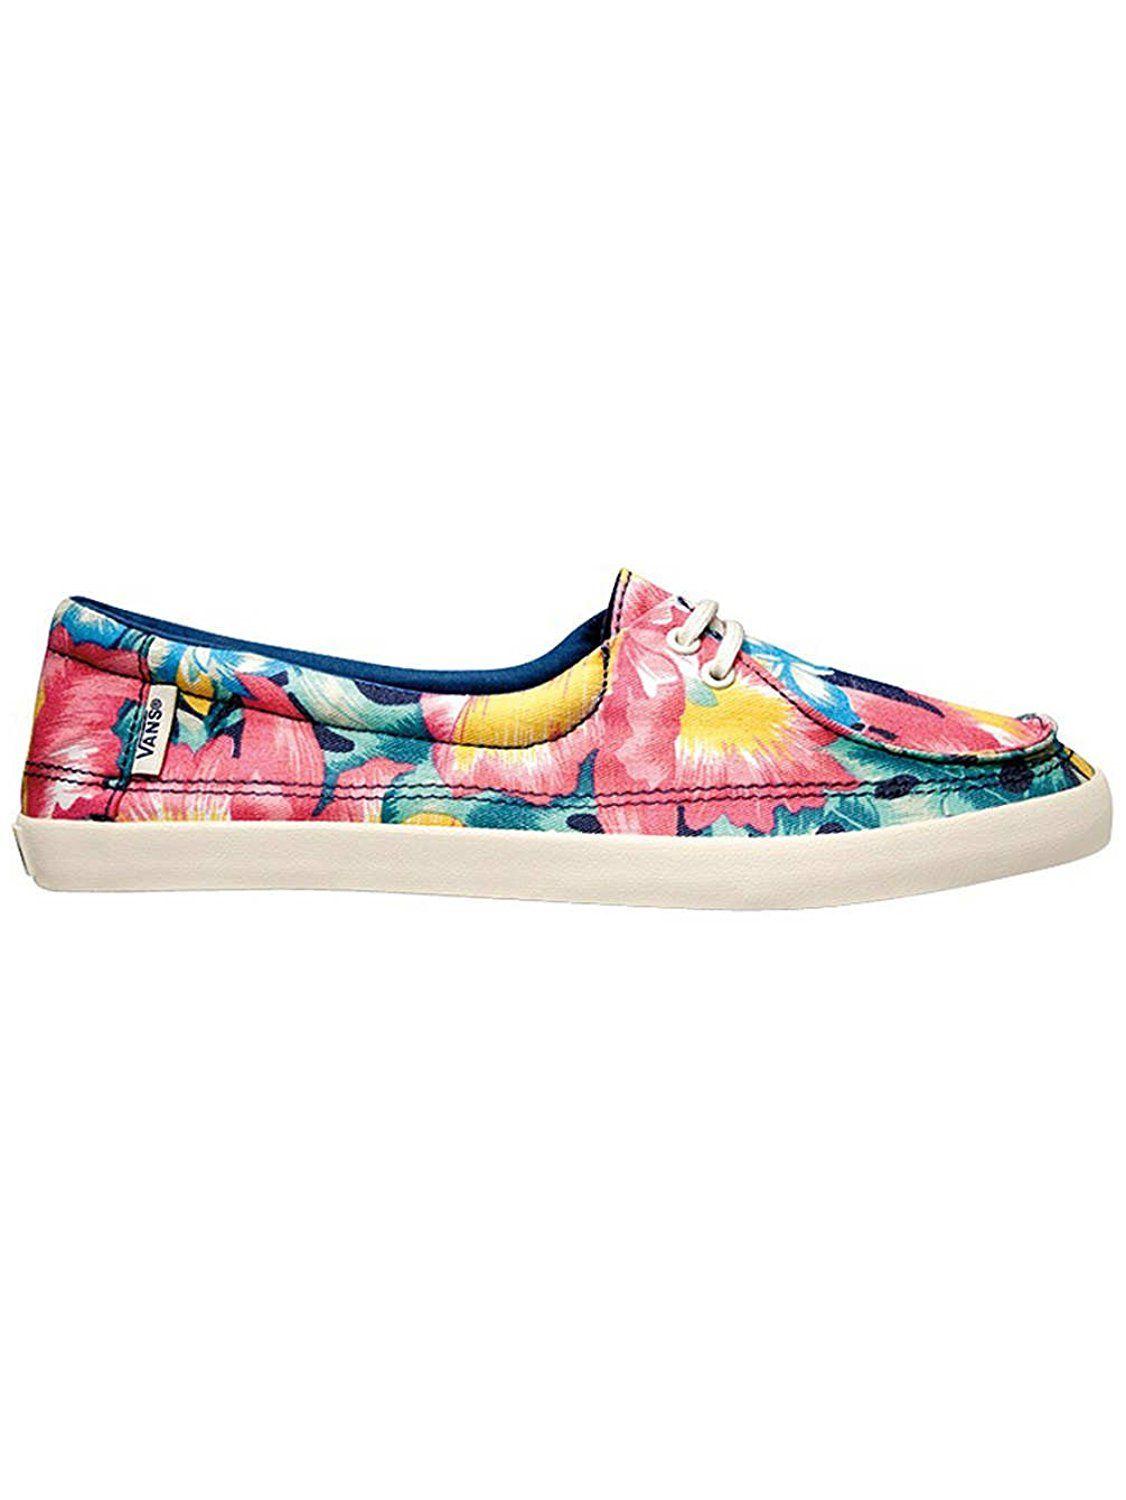 Vans Galaxy Logo - vans clothing store sydney, Yours clothing vans blue tropical floral ...